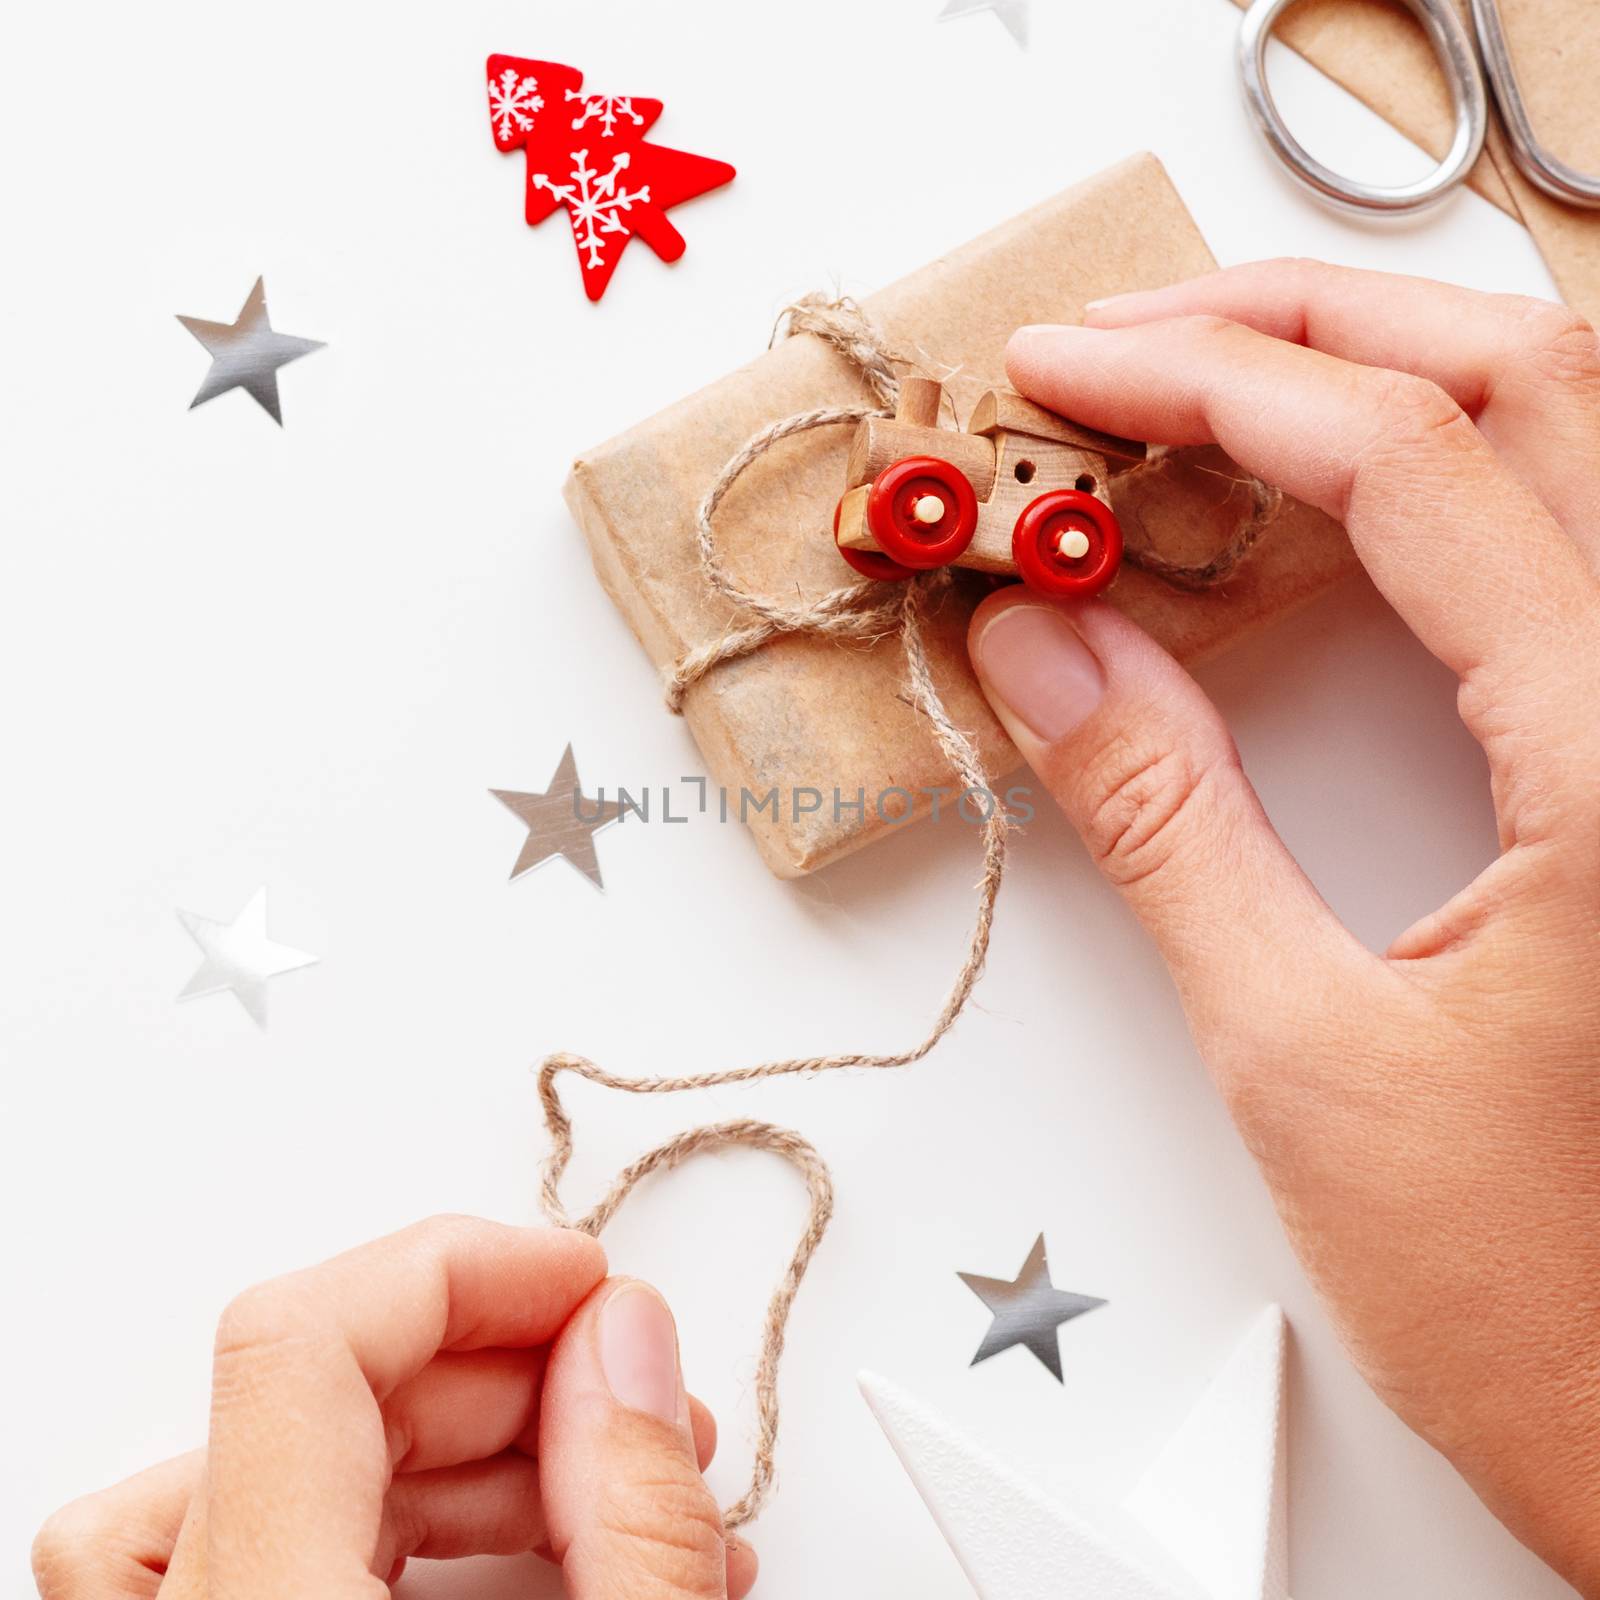 Woman wrapping Christmas and New Year DIY presents in craft paper. Gift tied with toy train as decoration.